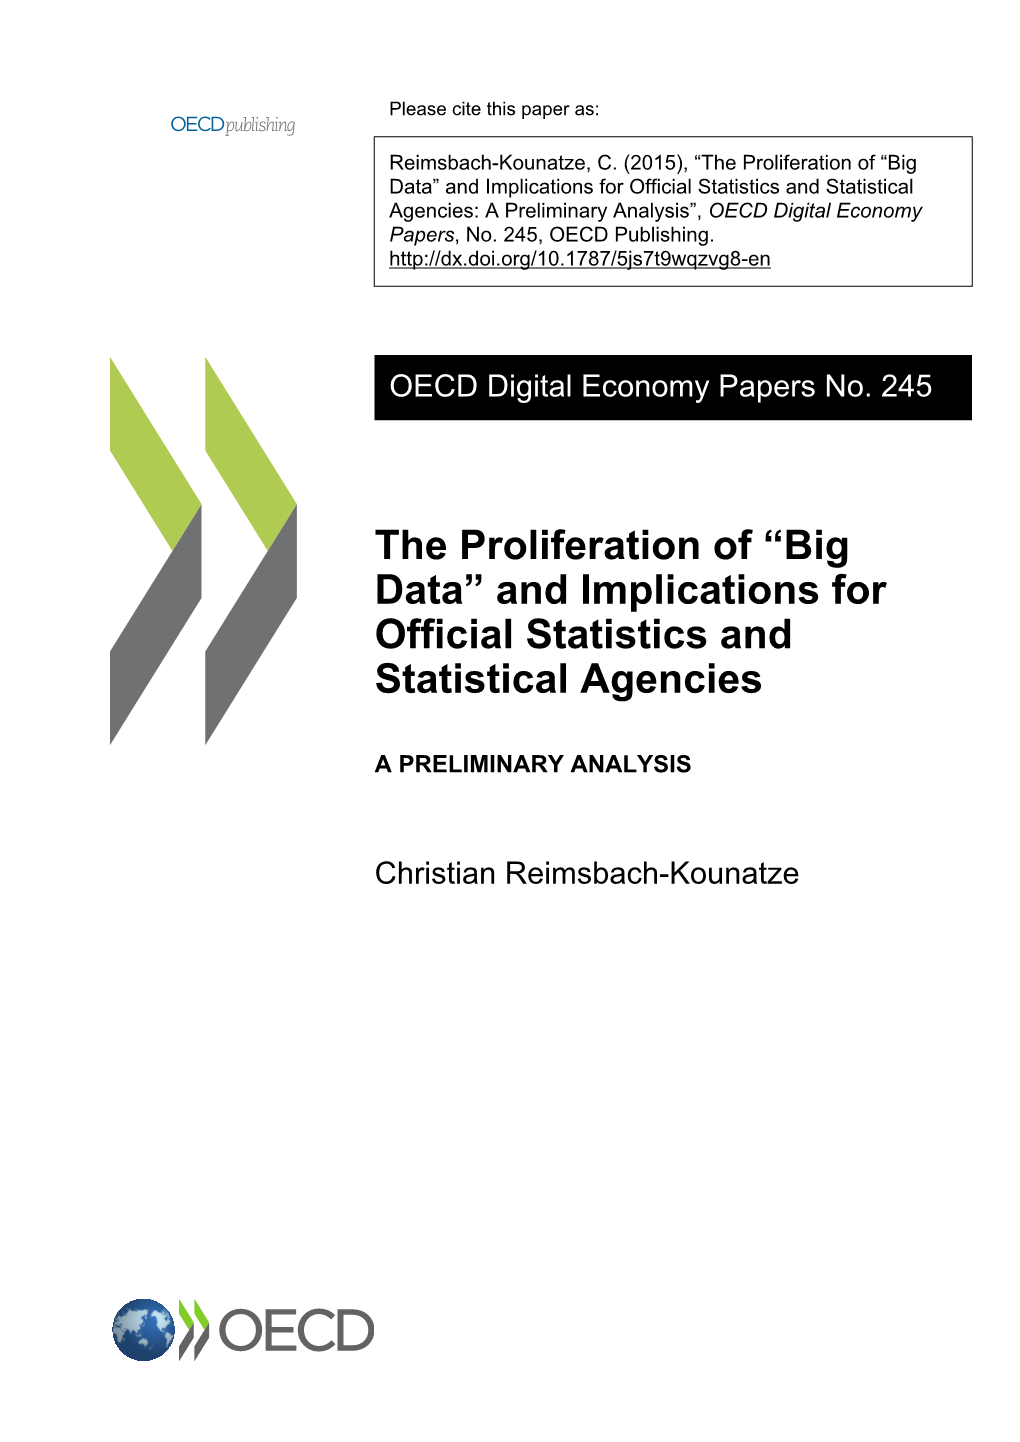 The Proliferation of “Big Data” and Implications for Official Statistics and Statistical Agencies: a Preliminary Analysis”, OECD Digital Economy Papers, No